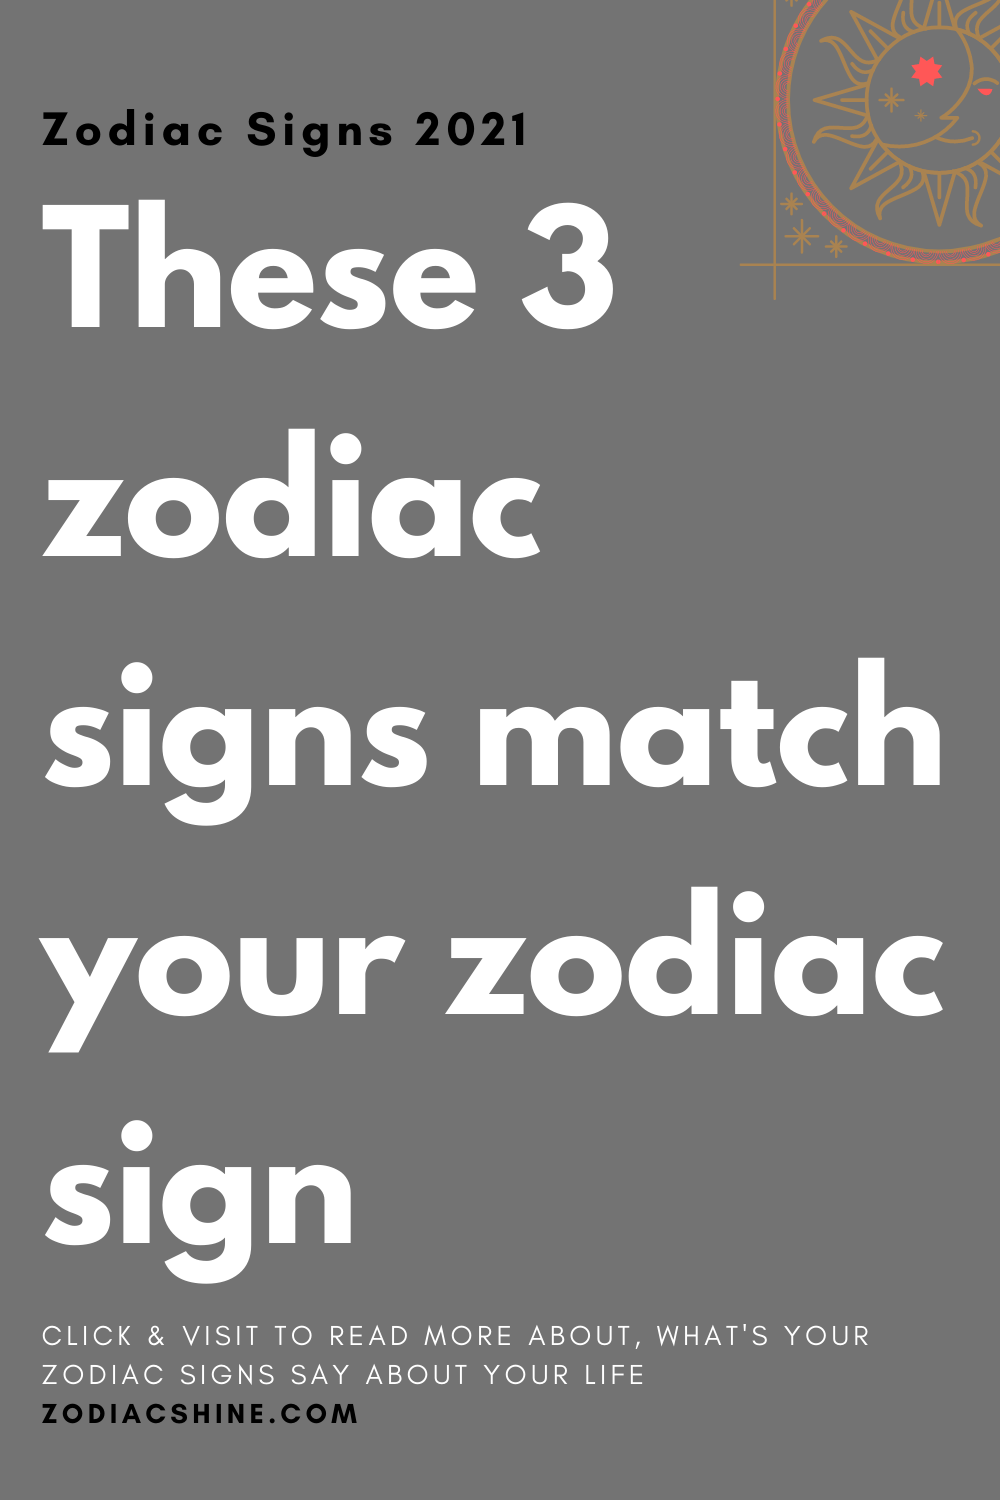 These 3 zodiac signs match your zodiac sign